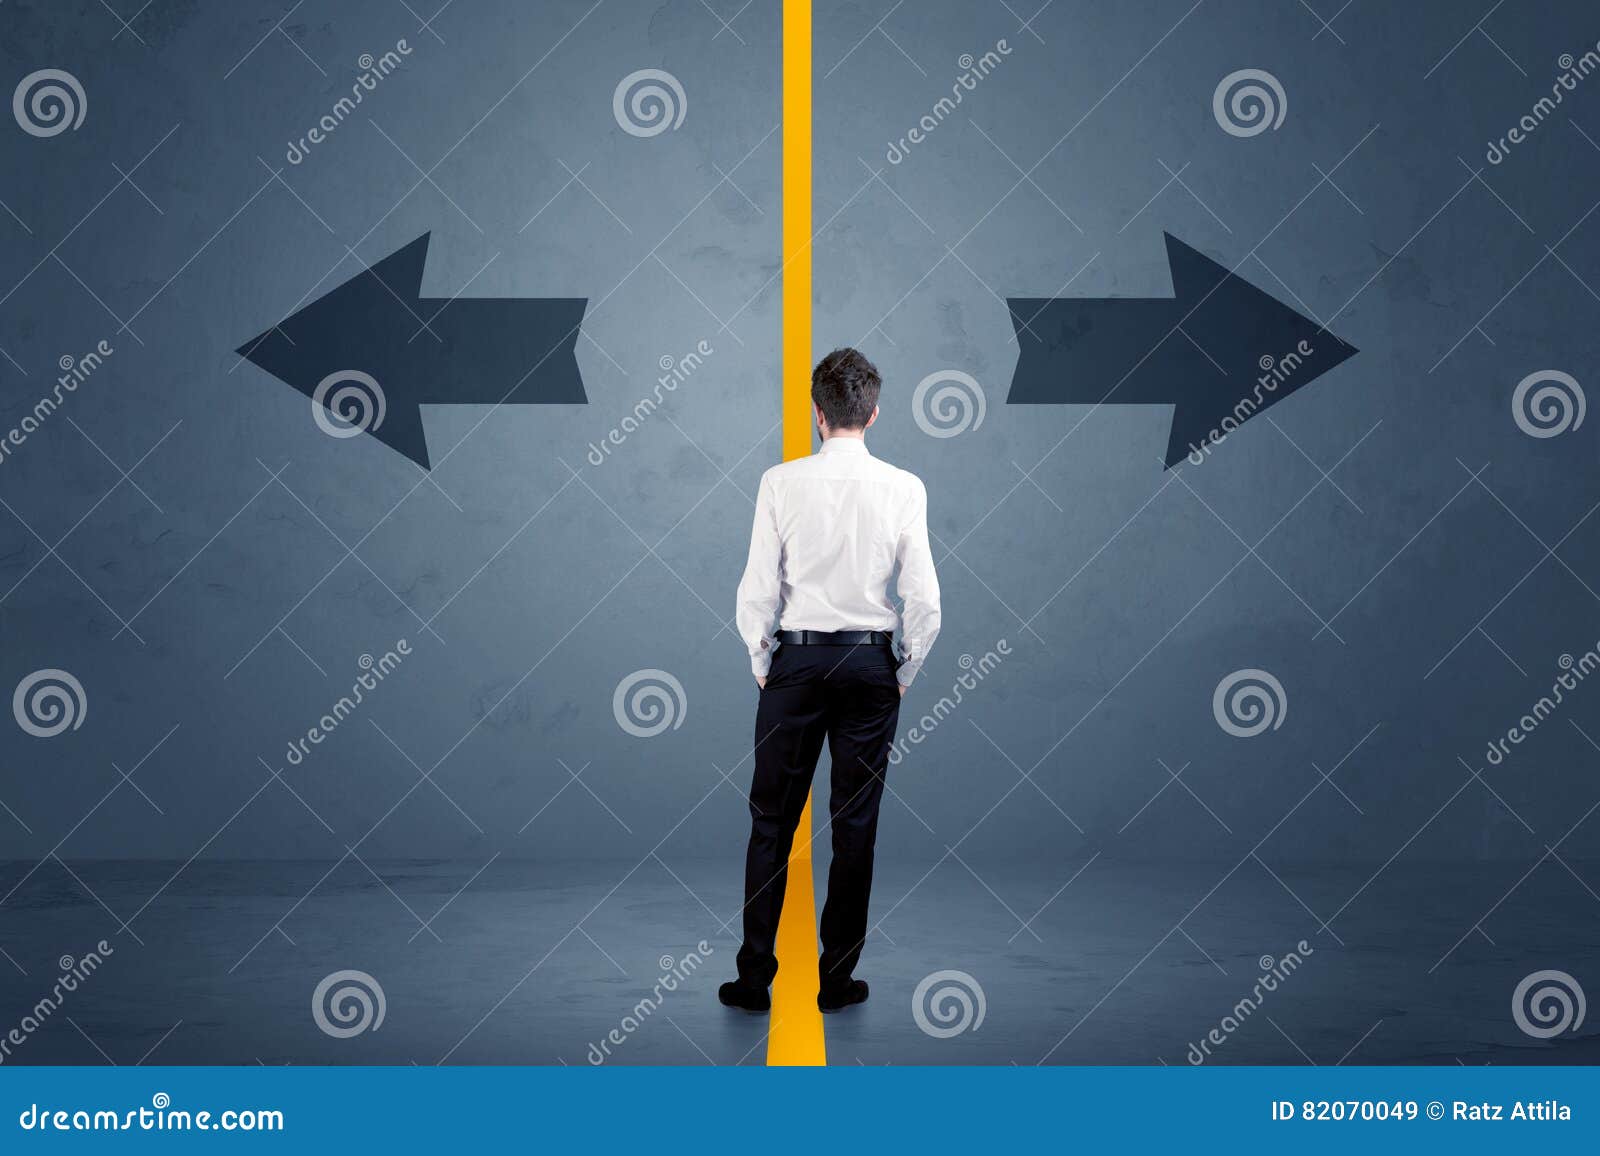 business person choosing between two options separated by a yell